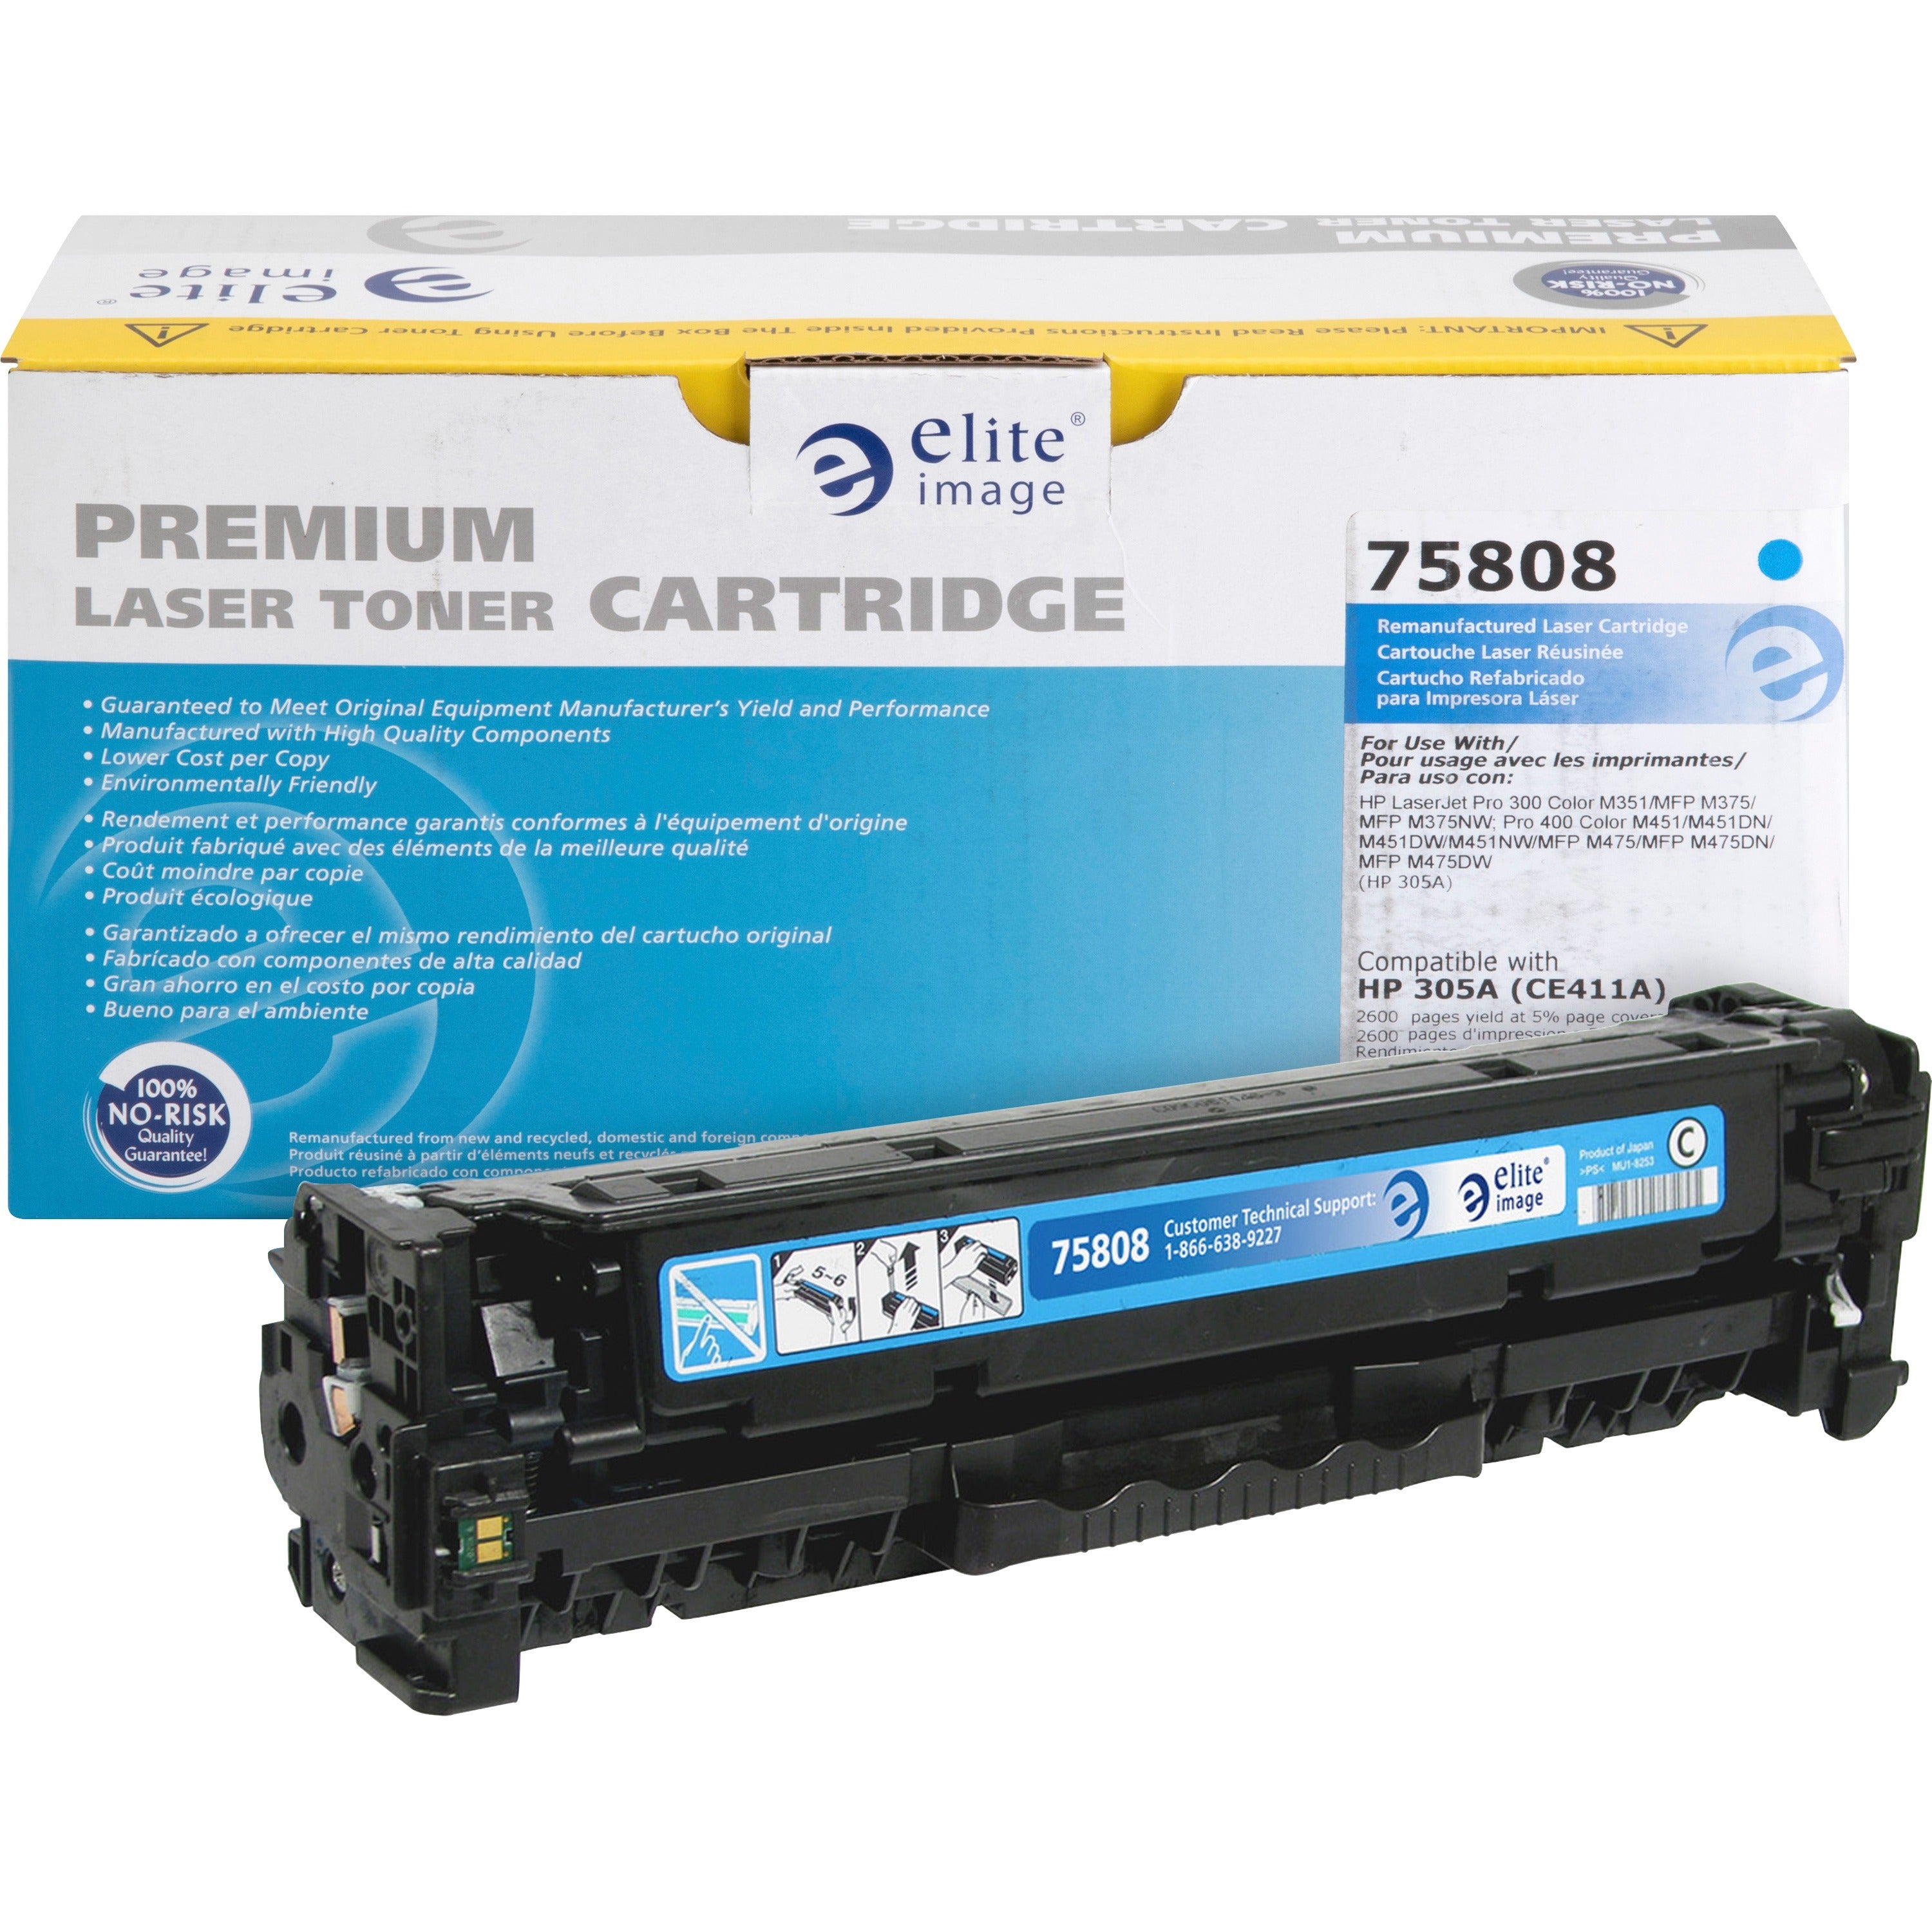 Elite Image Remanufactured Toner Cartridge - Alternative for HP 305A (CE411A) - Laser - 2600 Pages - Cyan - 1 Each - 1